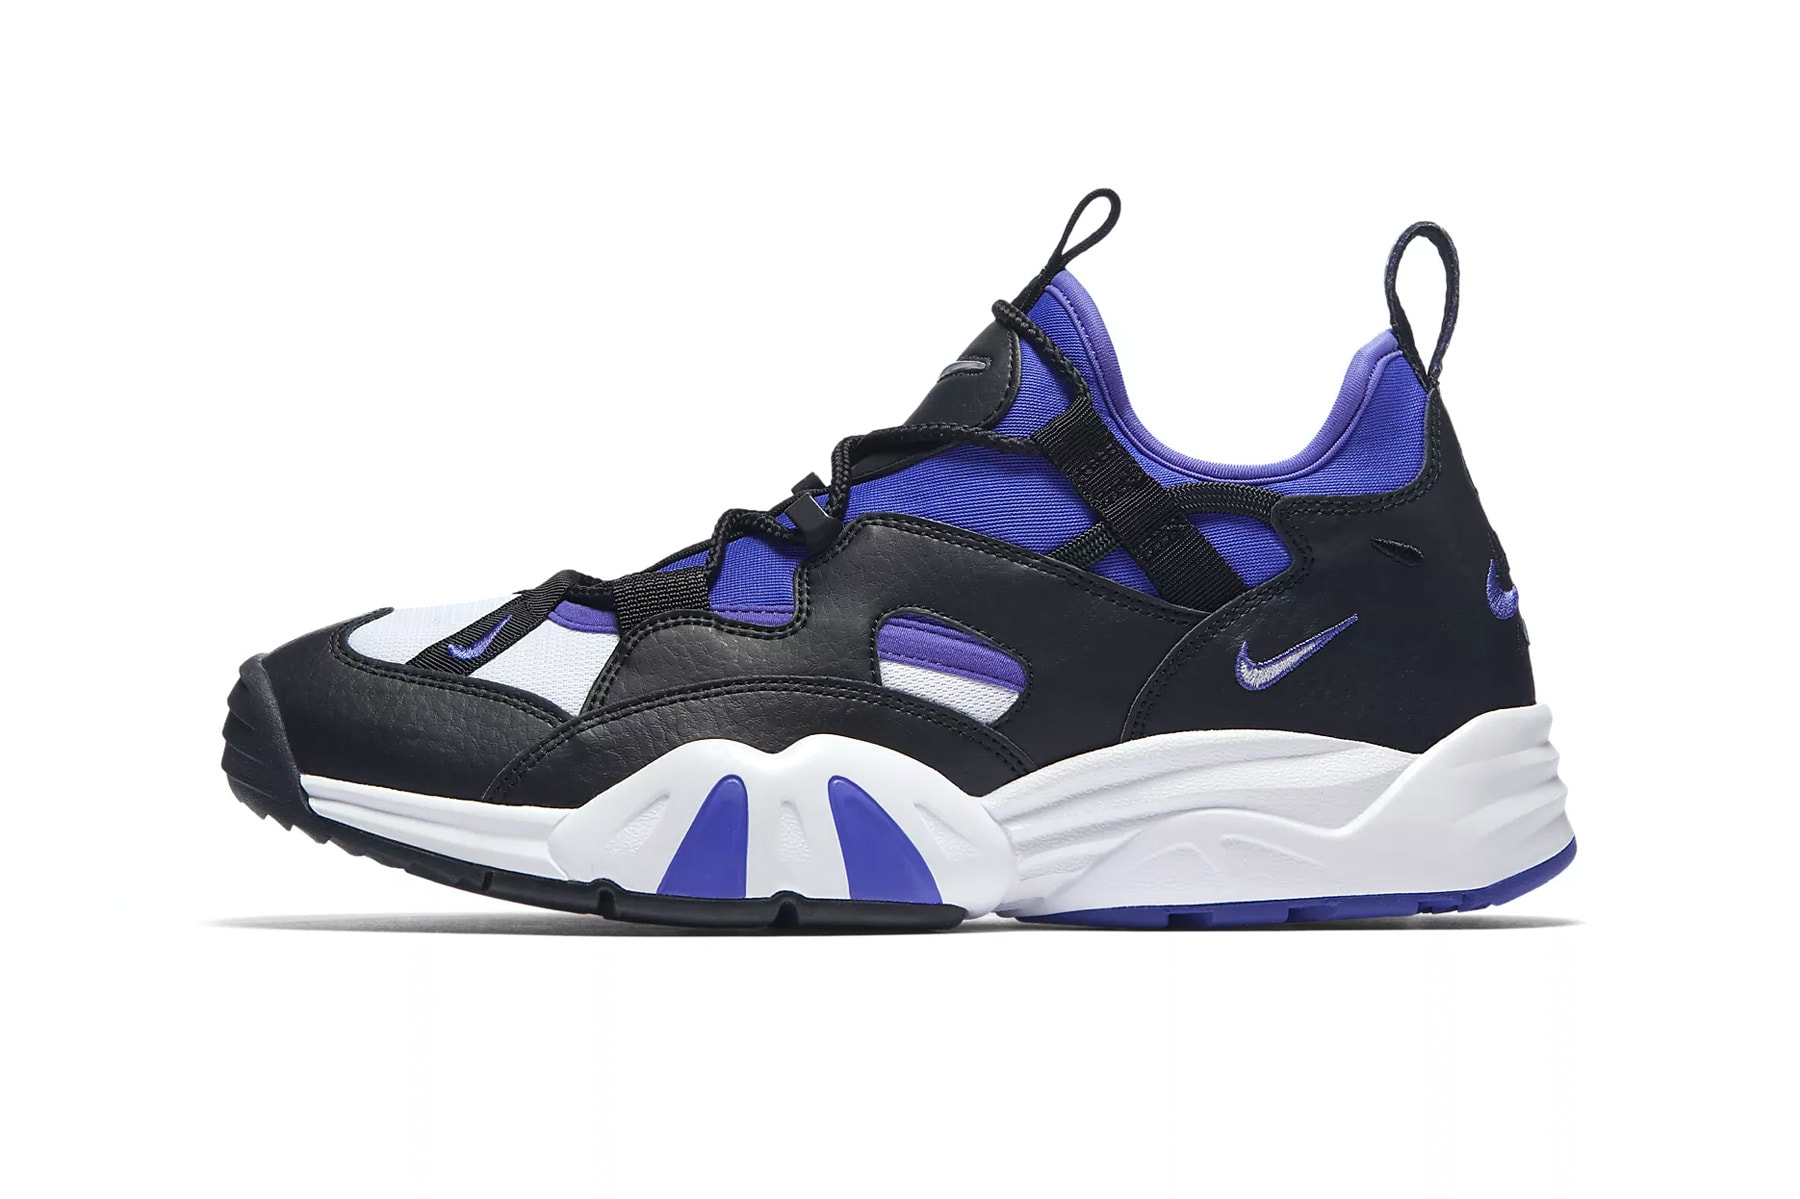 Nike Air Scream LWP Persian Violet release date available now purchase price sneaker